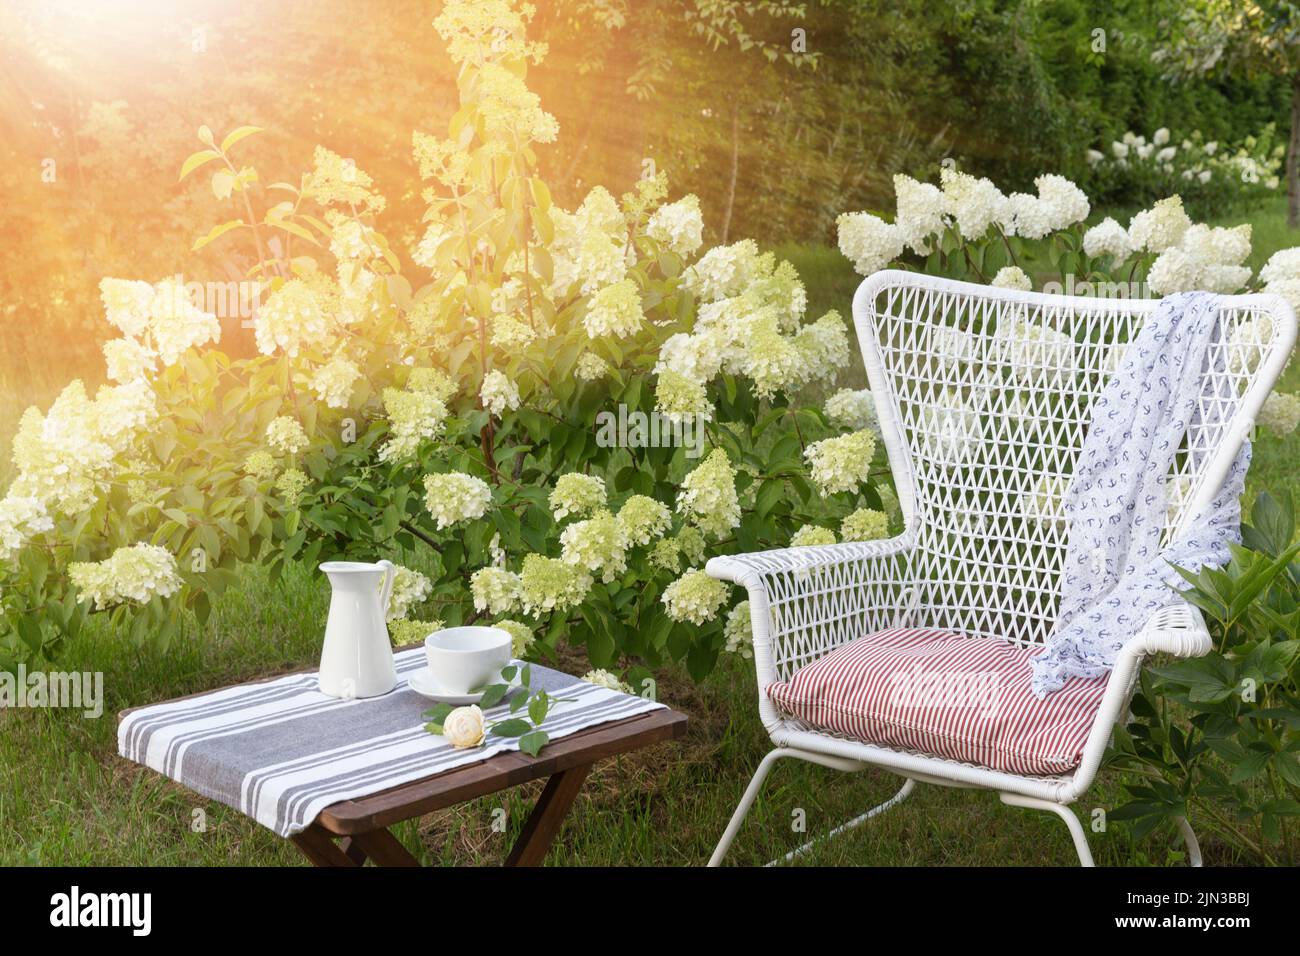 Romantic seating area in the garden, wooden table and white wicker chair near large blooming hydrangea bushes Stock Photo